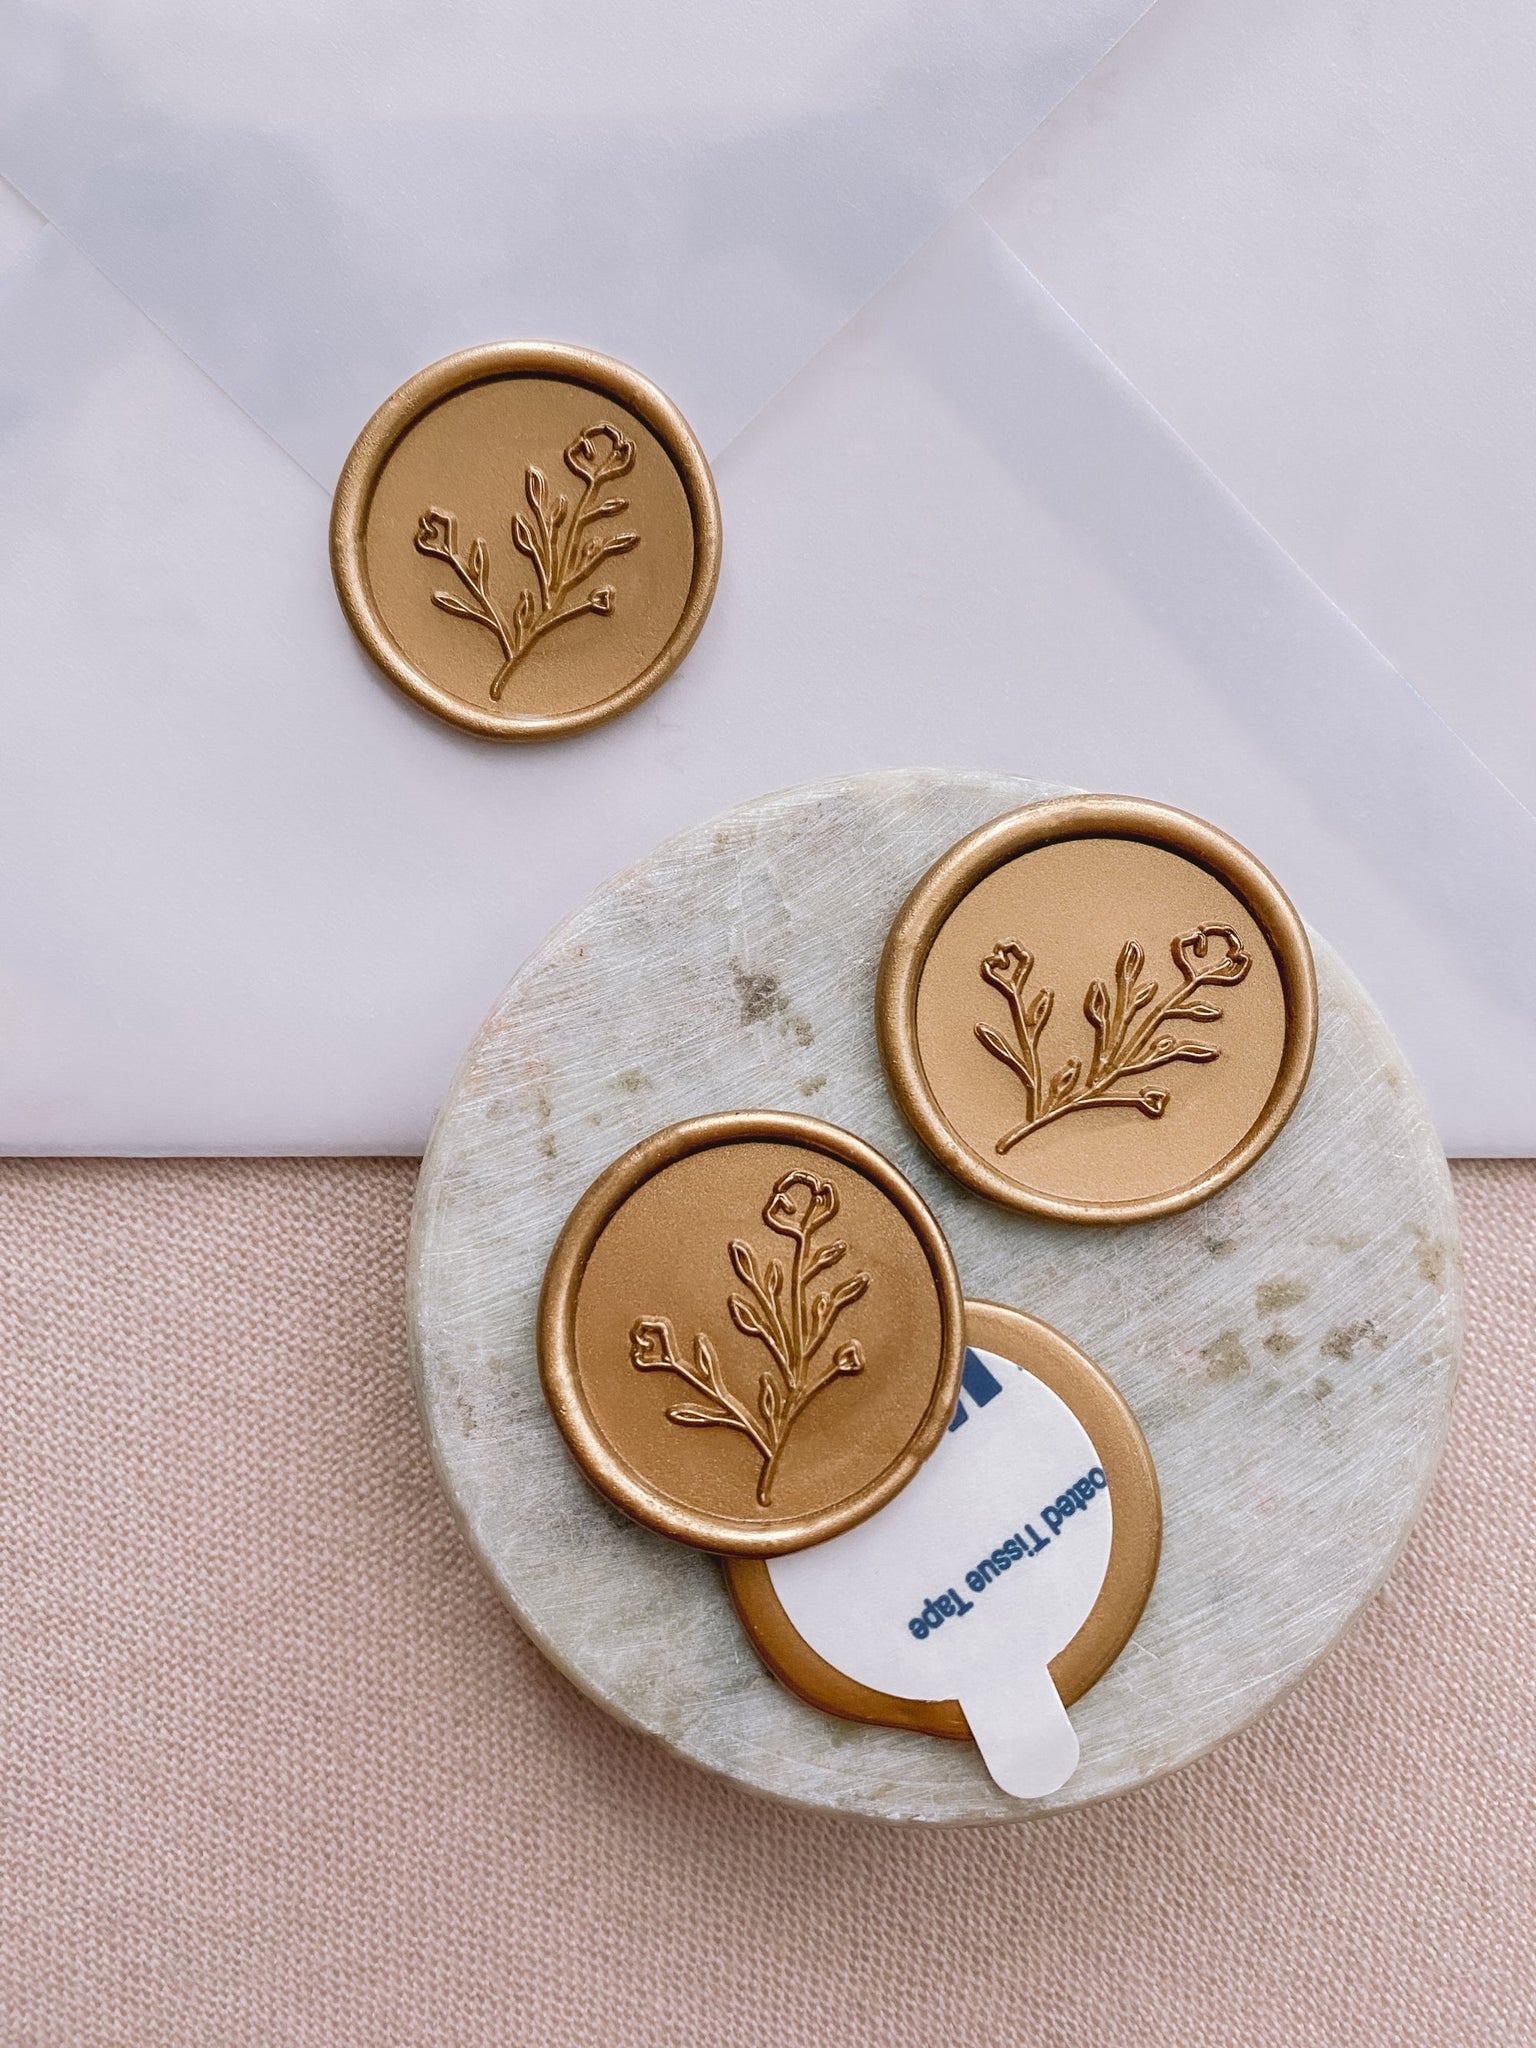 Botanical floral wax seal stickers in gold